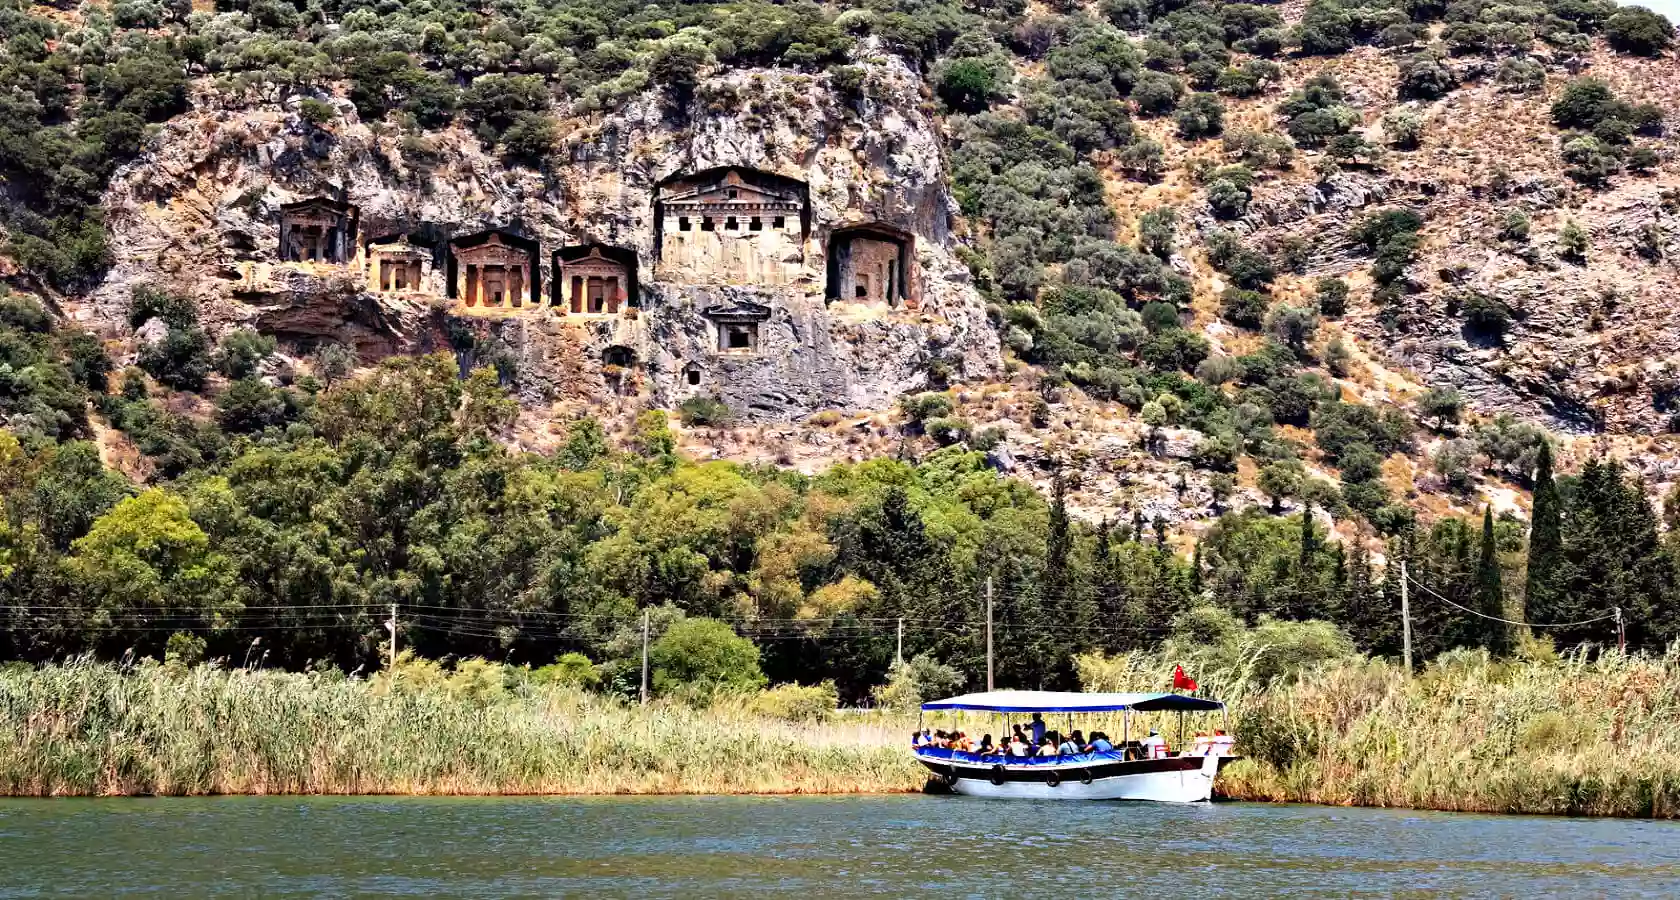 Dalyan in the province of Mugla. Description and characterization of the town.